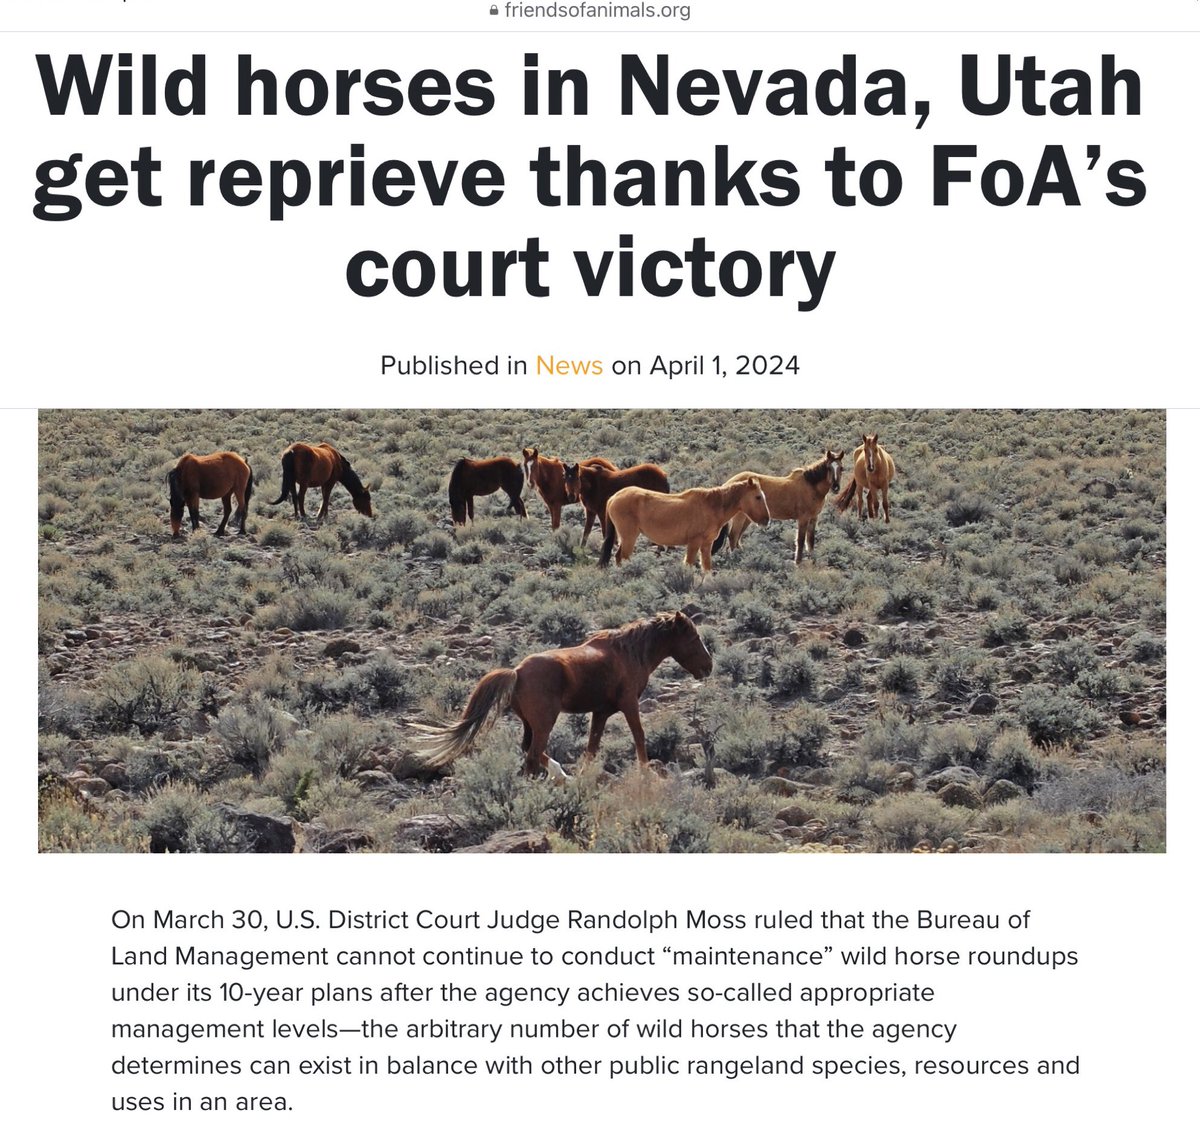 Bravo and many thanks to @FoAorg for this 👏🏼👏🏼👏🏼 friendsofanimals.org/wild-horses-in… If you don’t follow Friends of Animals, please do. They do amazing work. Thank you, @pferal ❤️